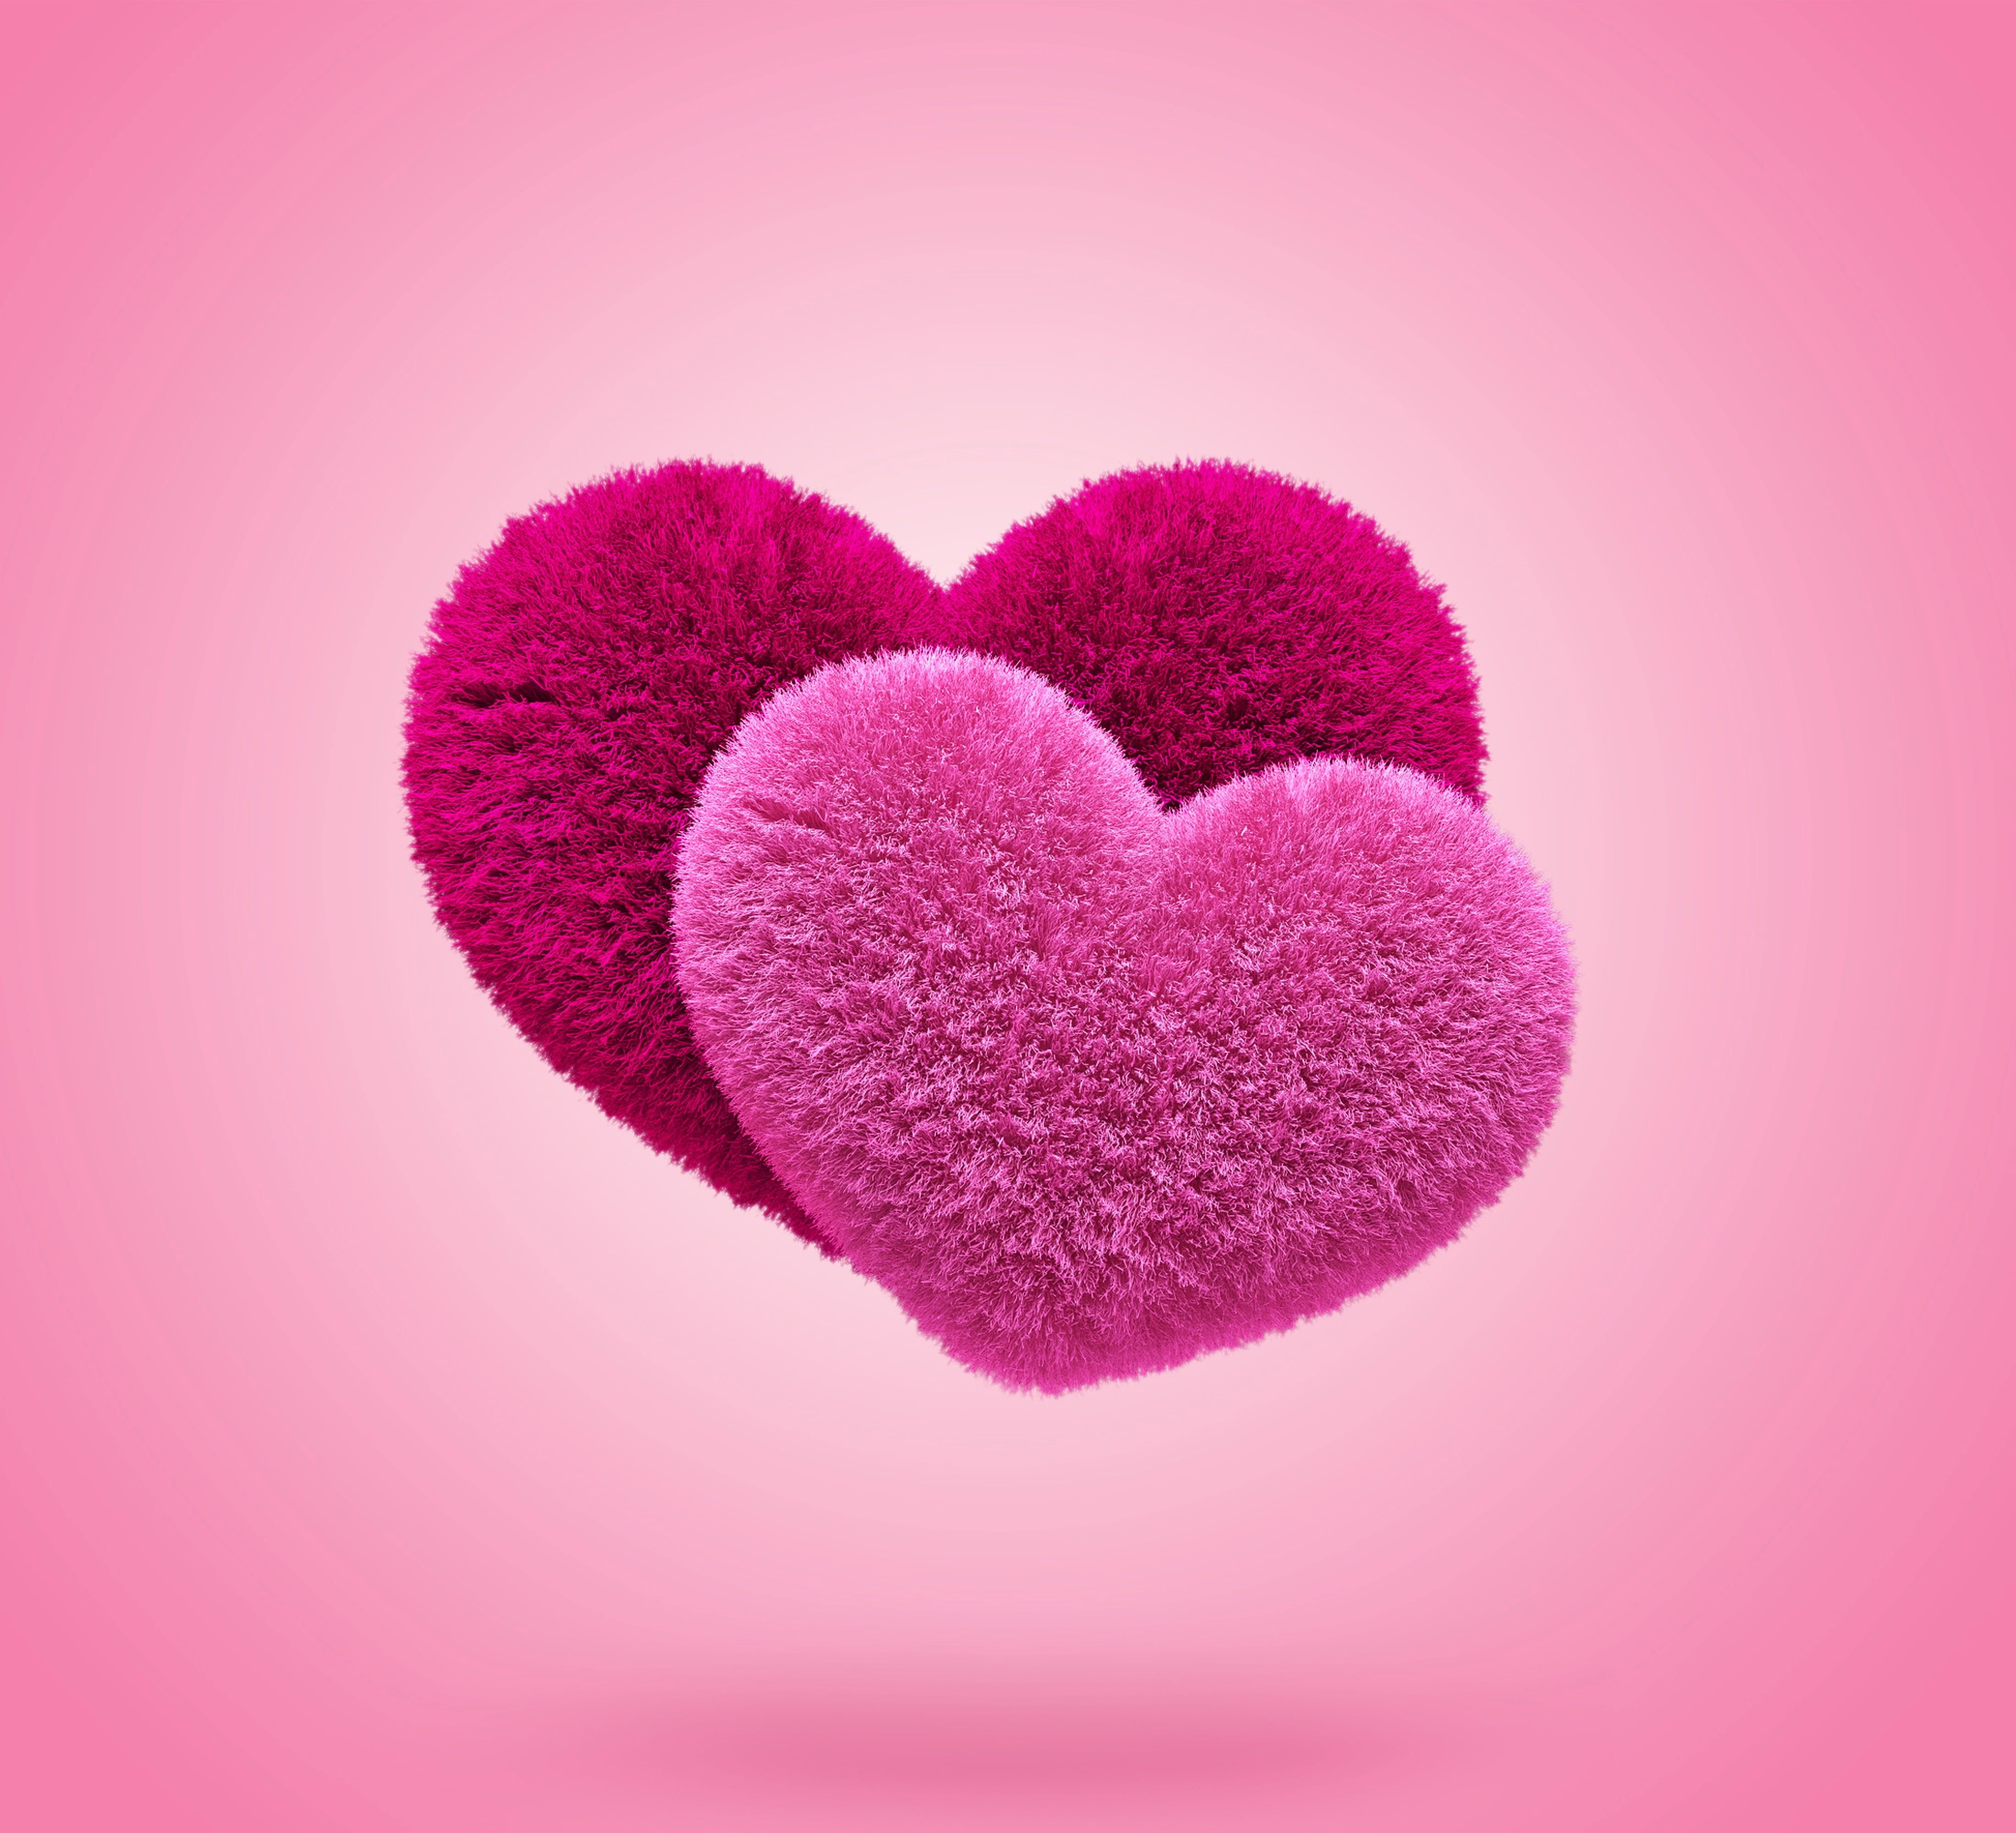 pink and red heart photo #hearts #love #fluffy #pink #hearts #fluffy K # wallpaper #hdwallpaper #desktop. Heart wallpaper, Flower phone wallpaper, Pink heart